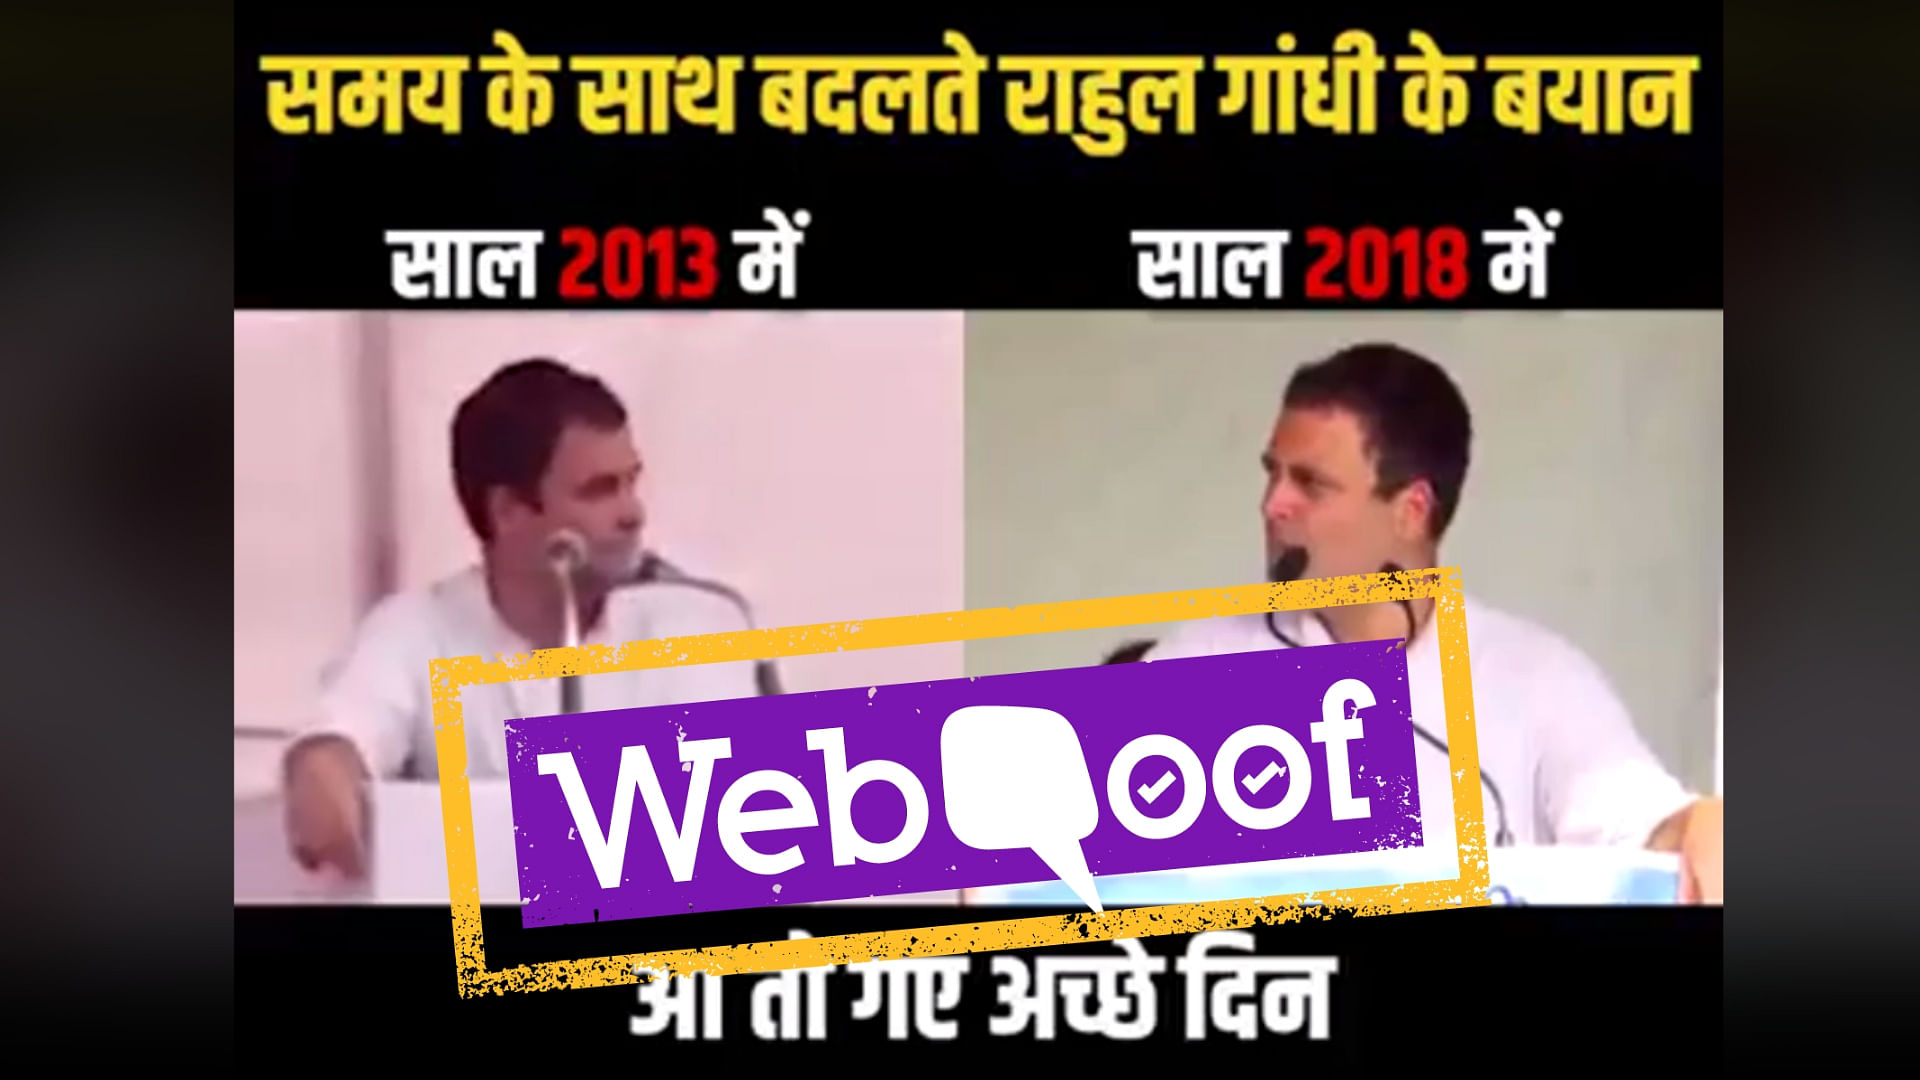 A viral video of Rahul Gandhi making contradictory statements on farm loan waivers has been doing the rounds.